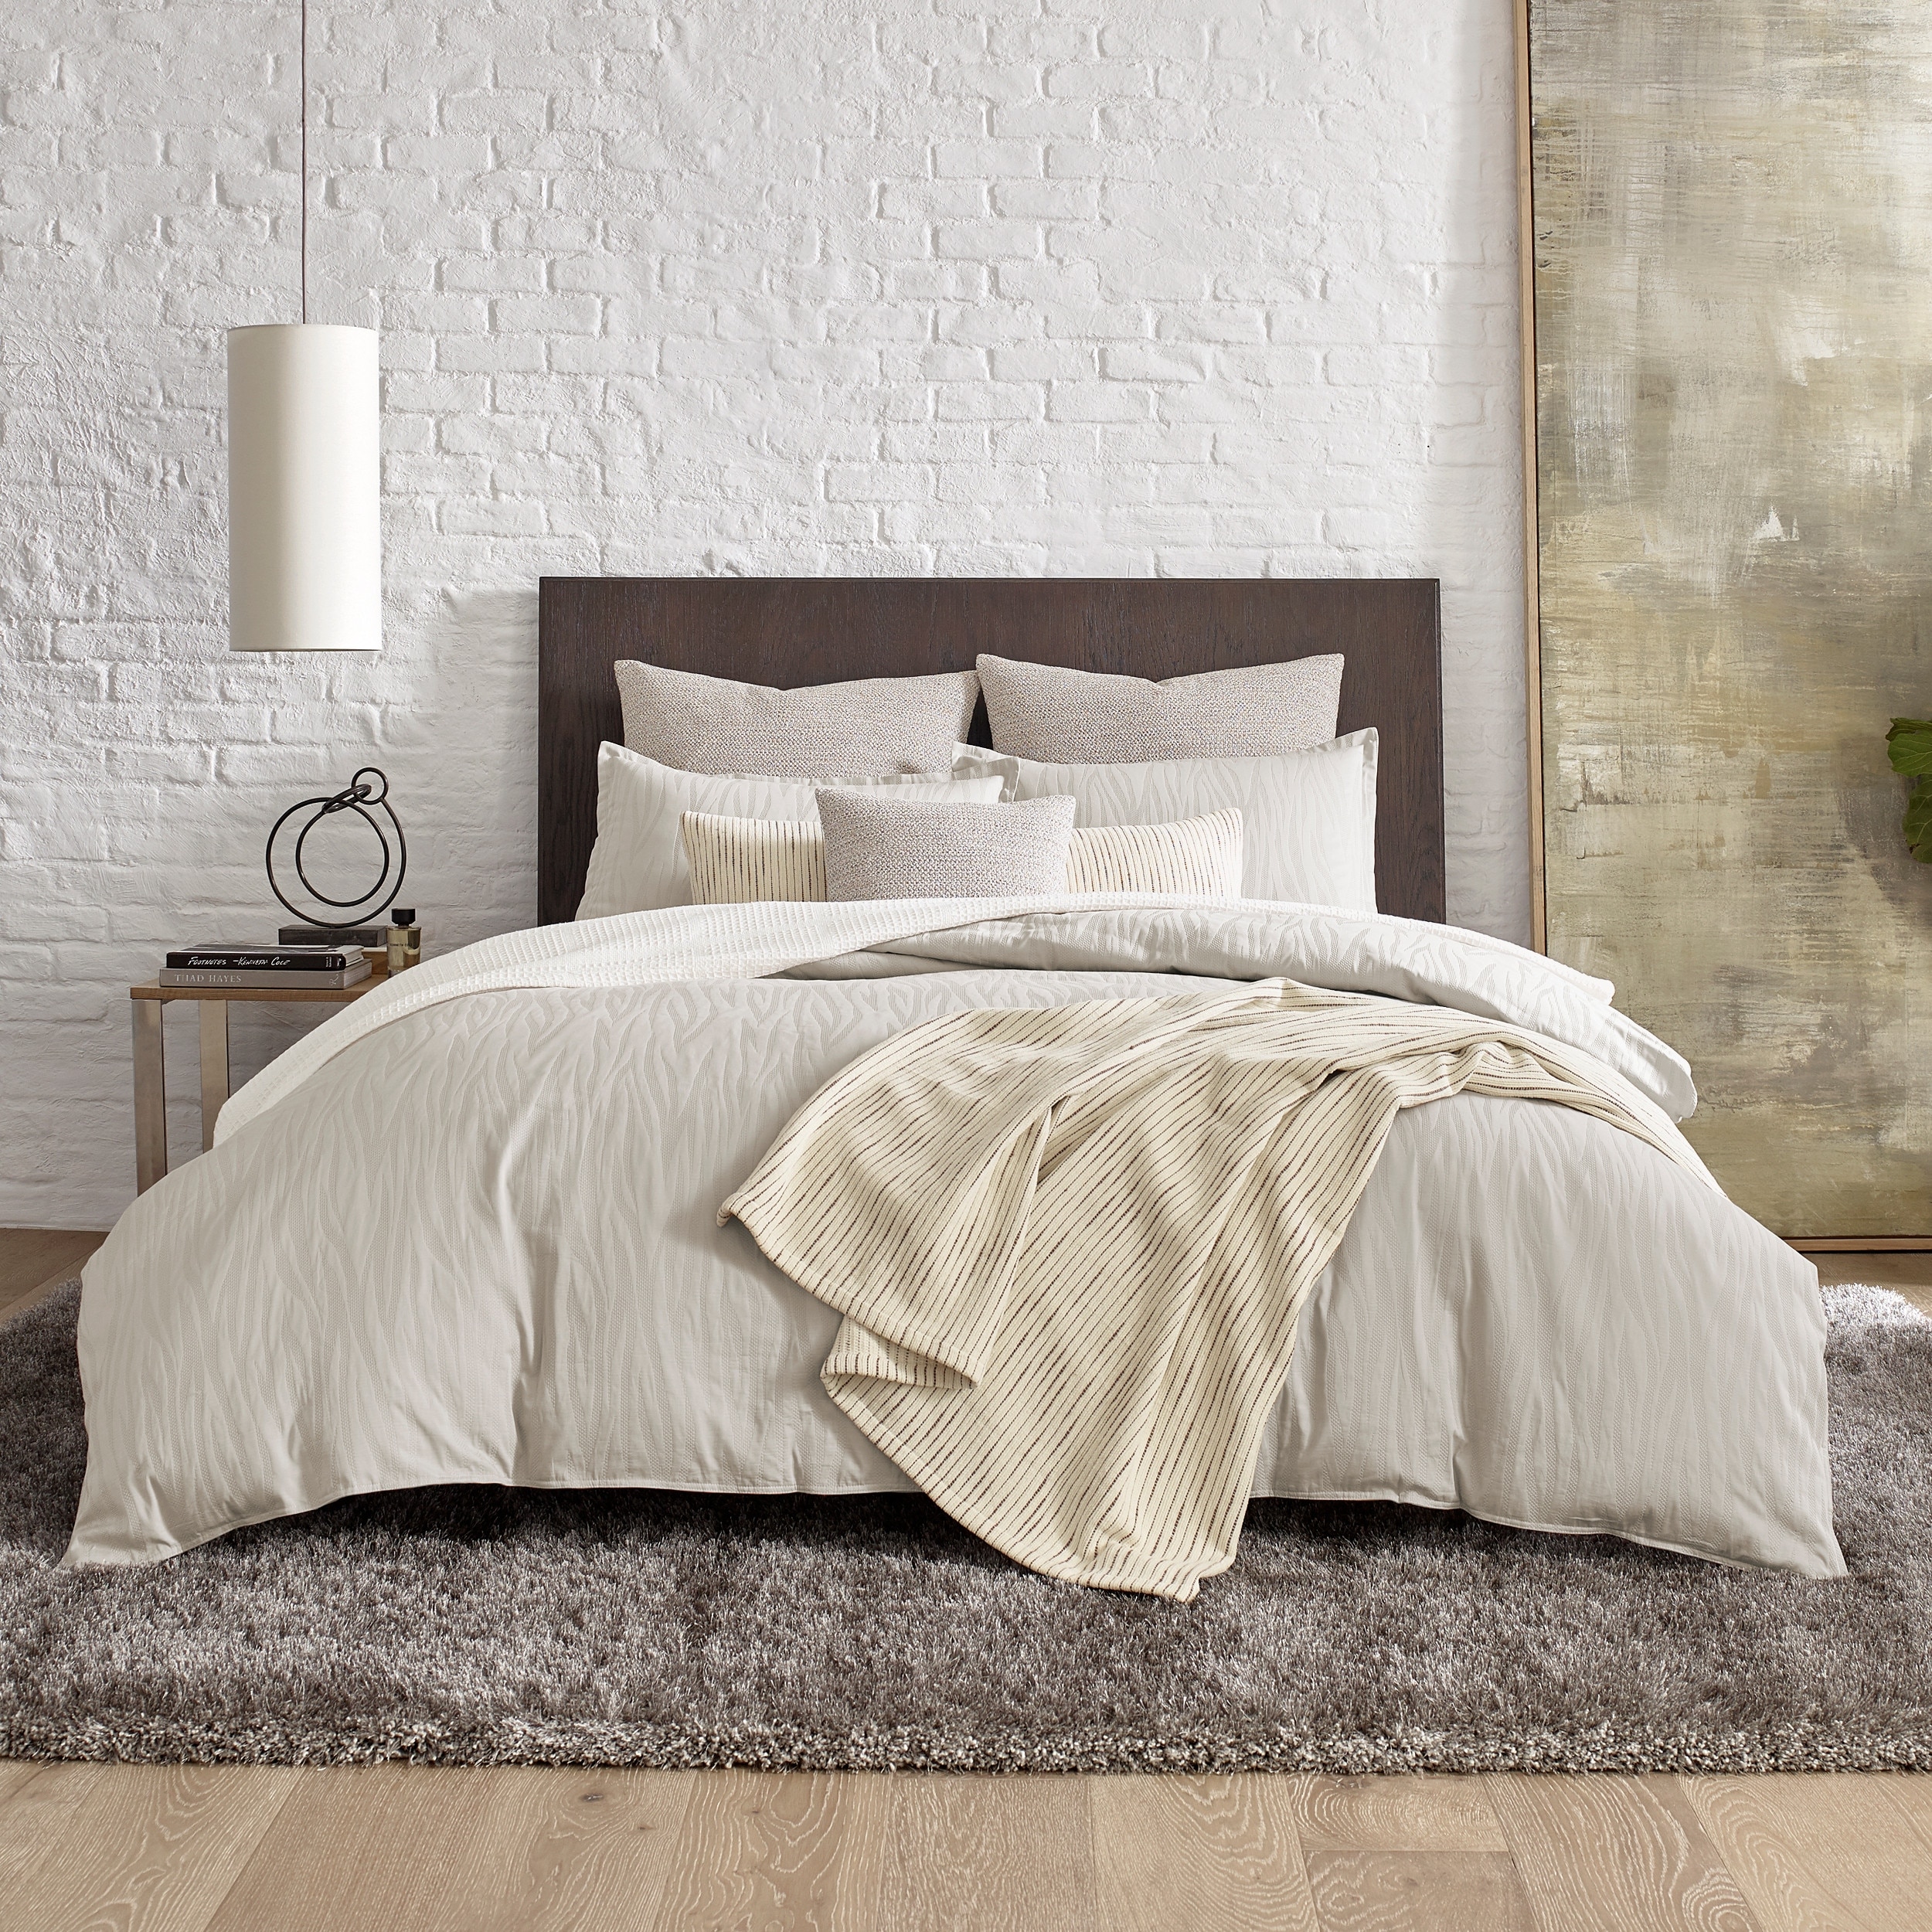 kenneth cole duvet bed bath and beyond